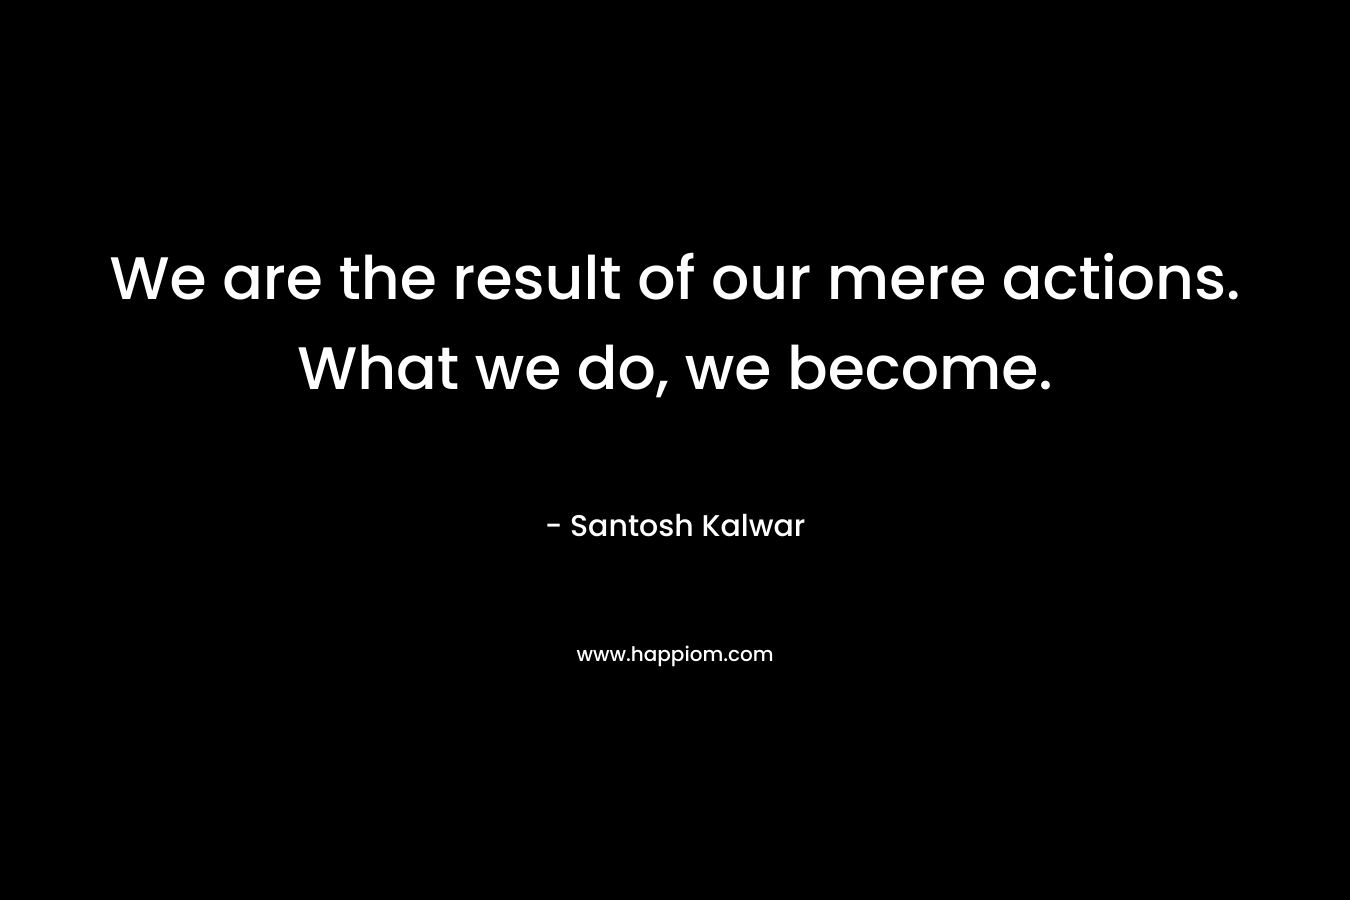 We are the result of our mere actions. What we do, we become.